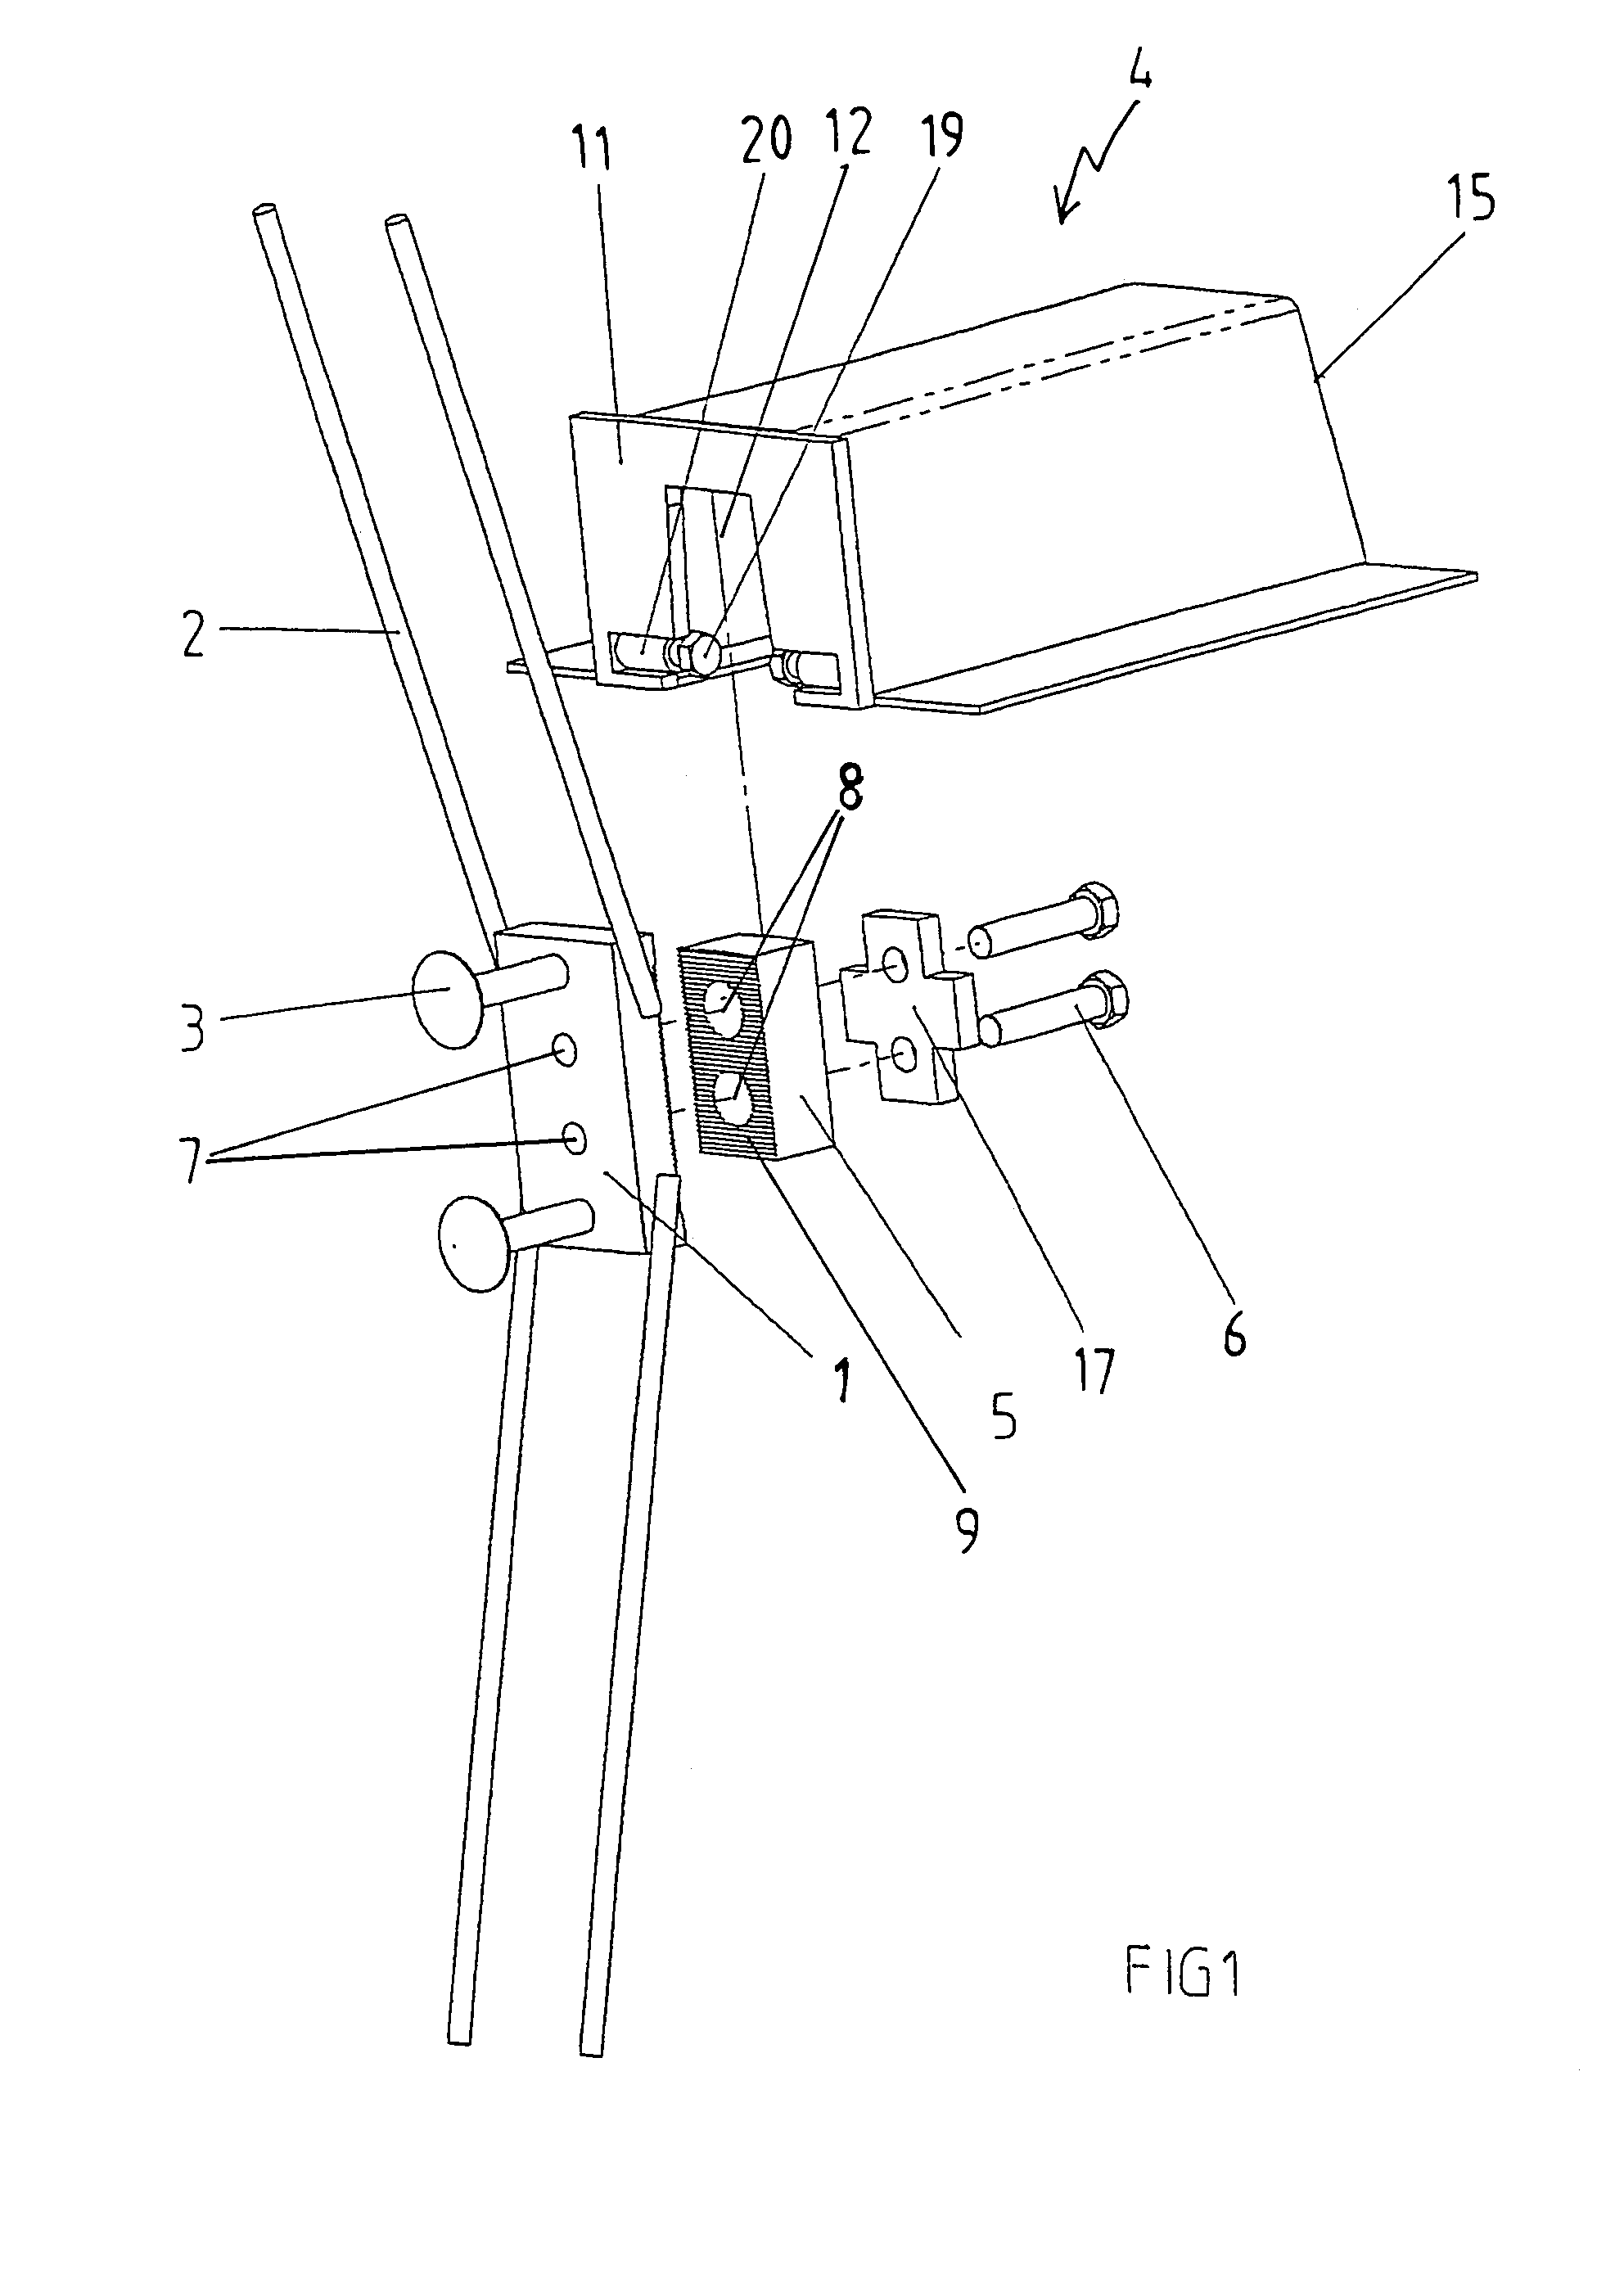 Bracket for supporting structural element to support structure